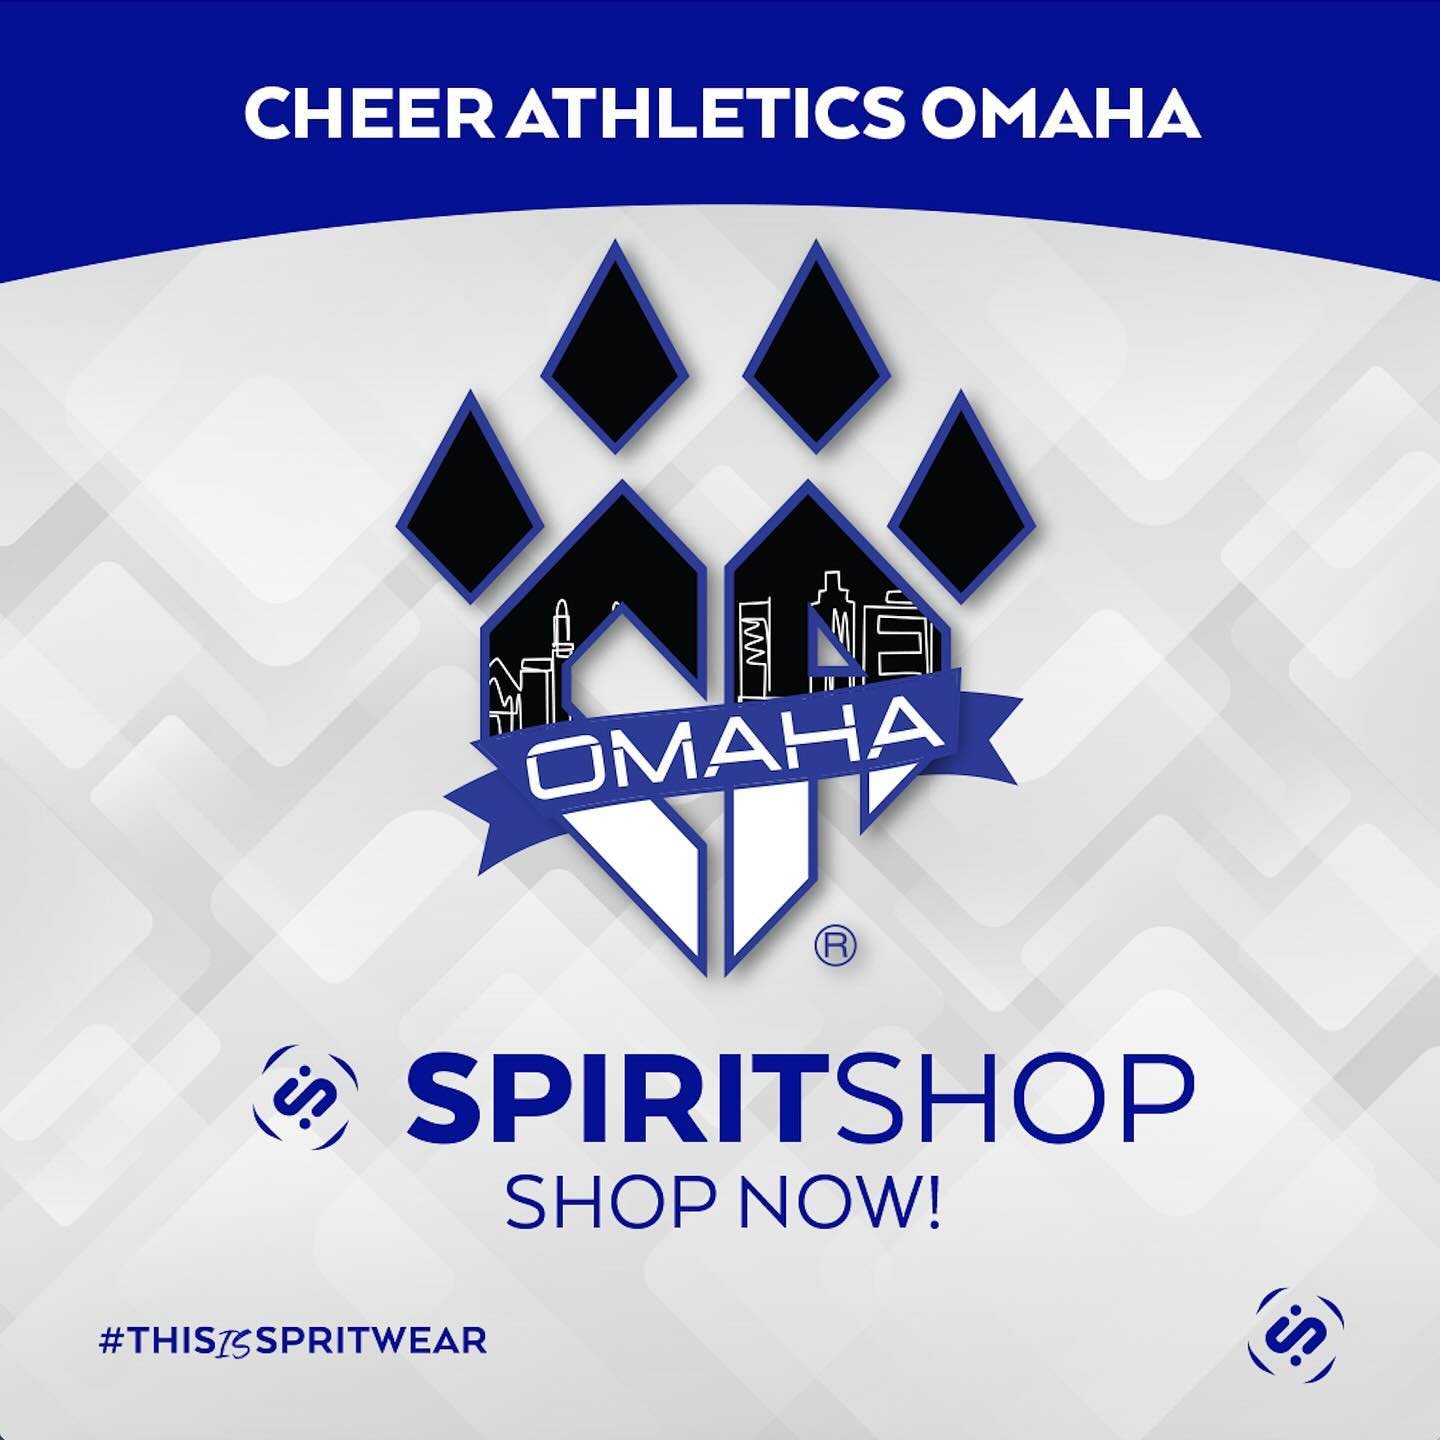 ONLY 1 Day Left!  This SpiritShop Closes At 12 Midnight, Sunday June 2nd!  ORDER TODAY!  Swipe 👈🏻 for QR Code. Gym Owners&hellip;Do You Need An Online SpiritShop? Turn Key, No Risk, No Inventory! Choose to be INNOVATIVE this season. Send us a messa